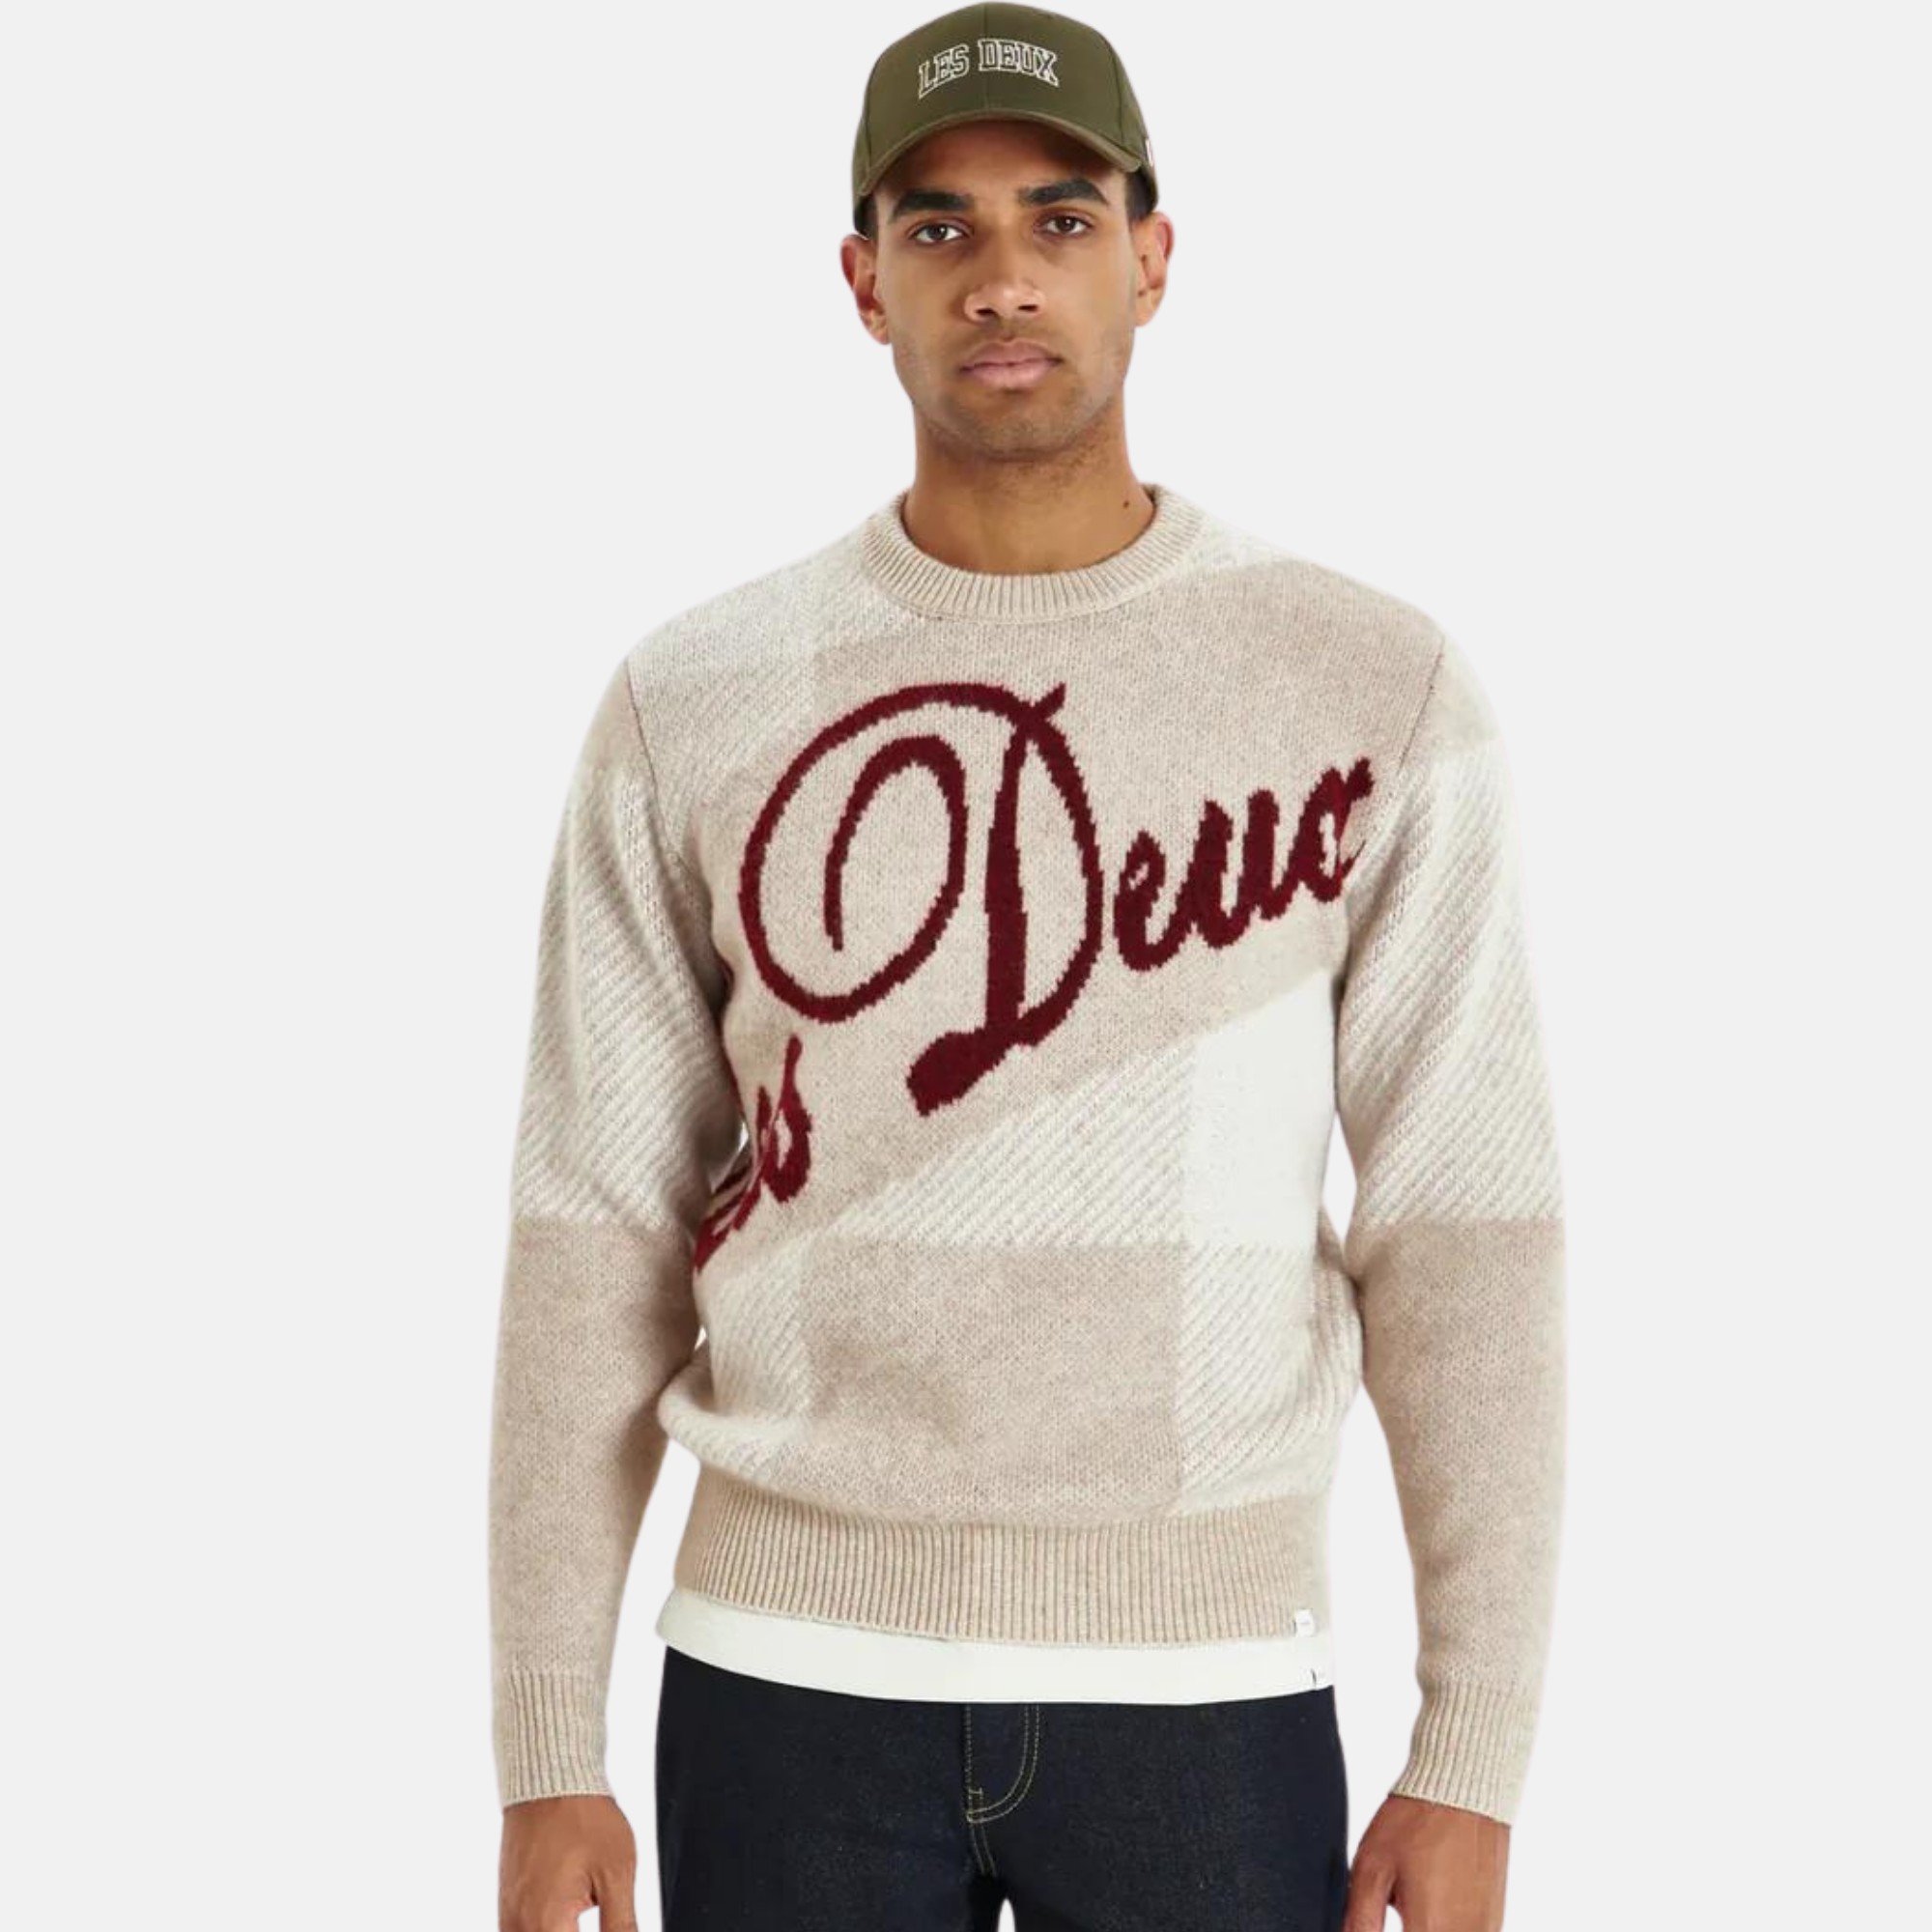 Les Deux Light Sand Buffalo Recycled Knit Sweater